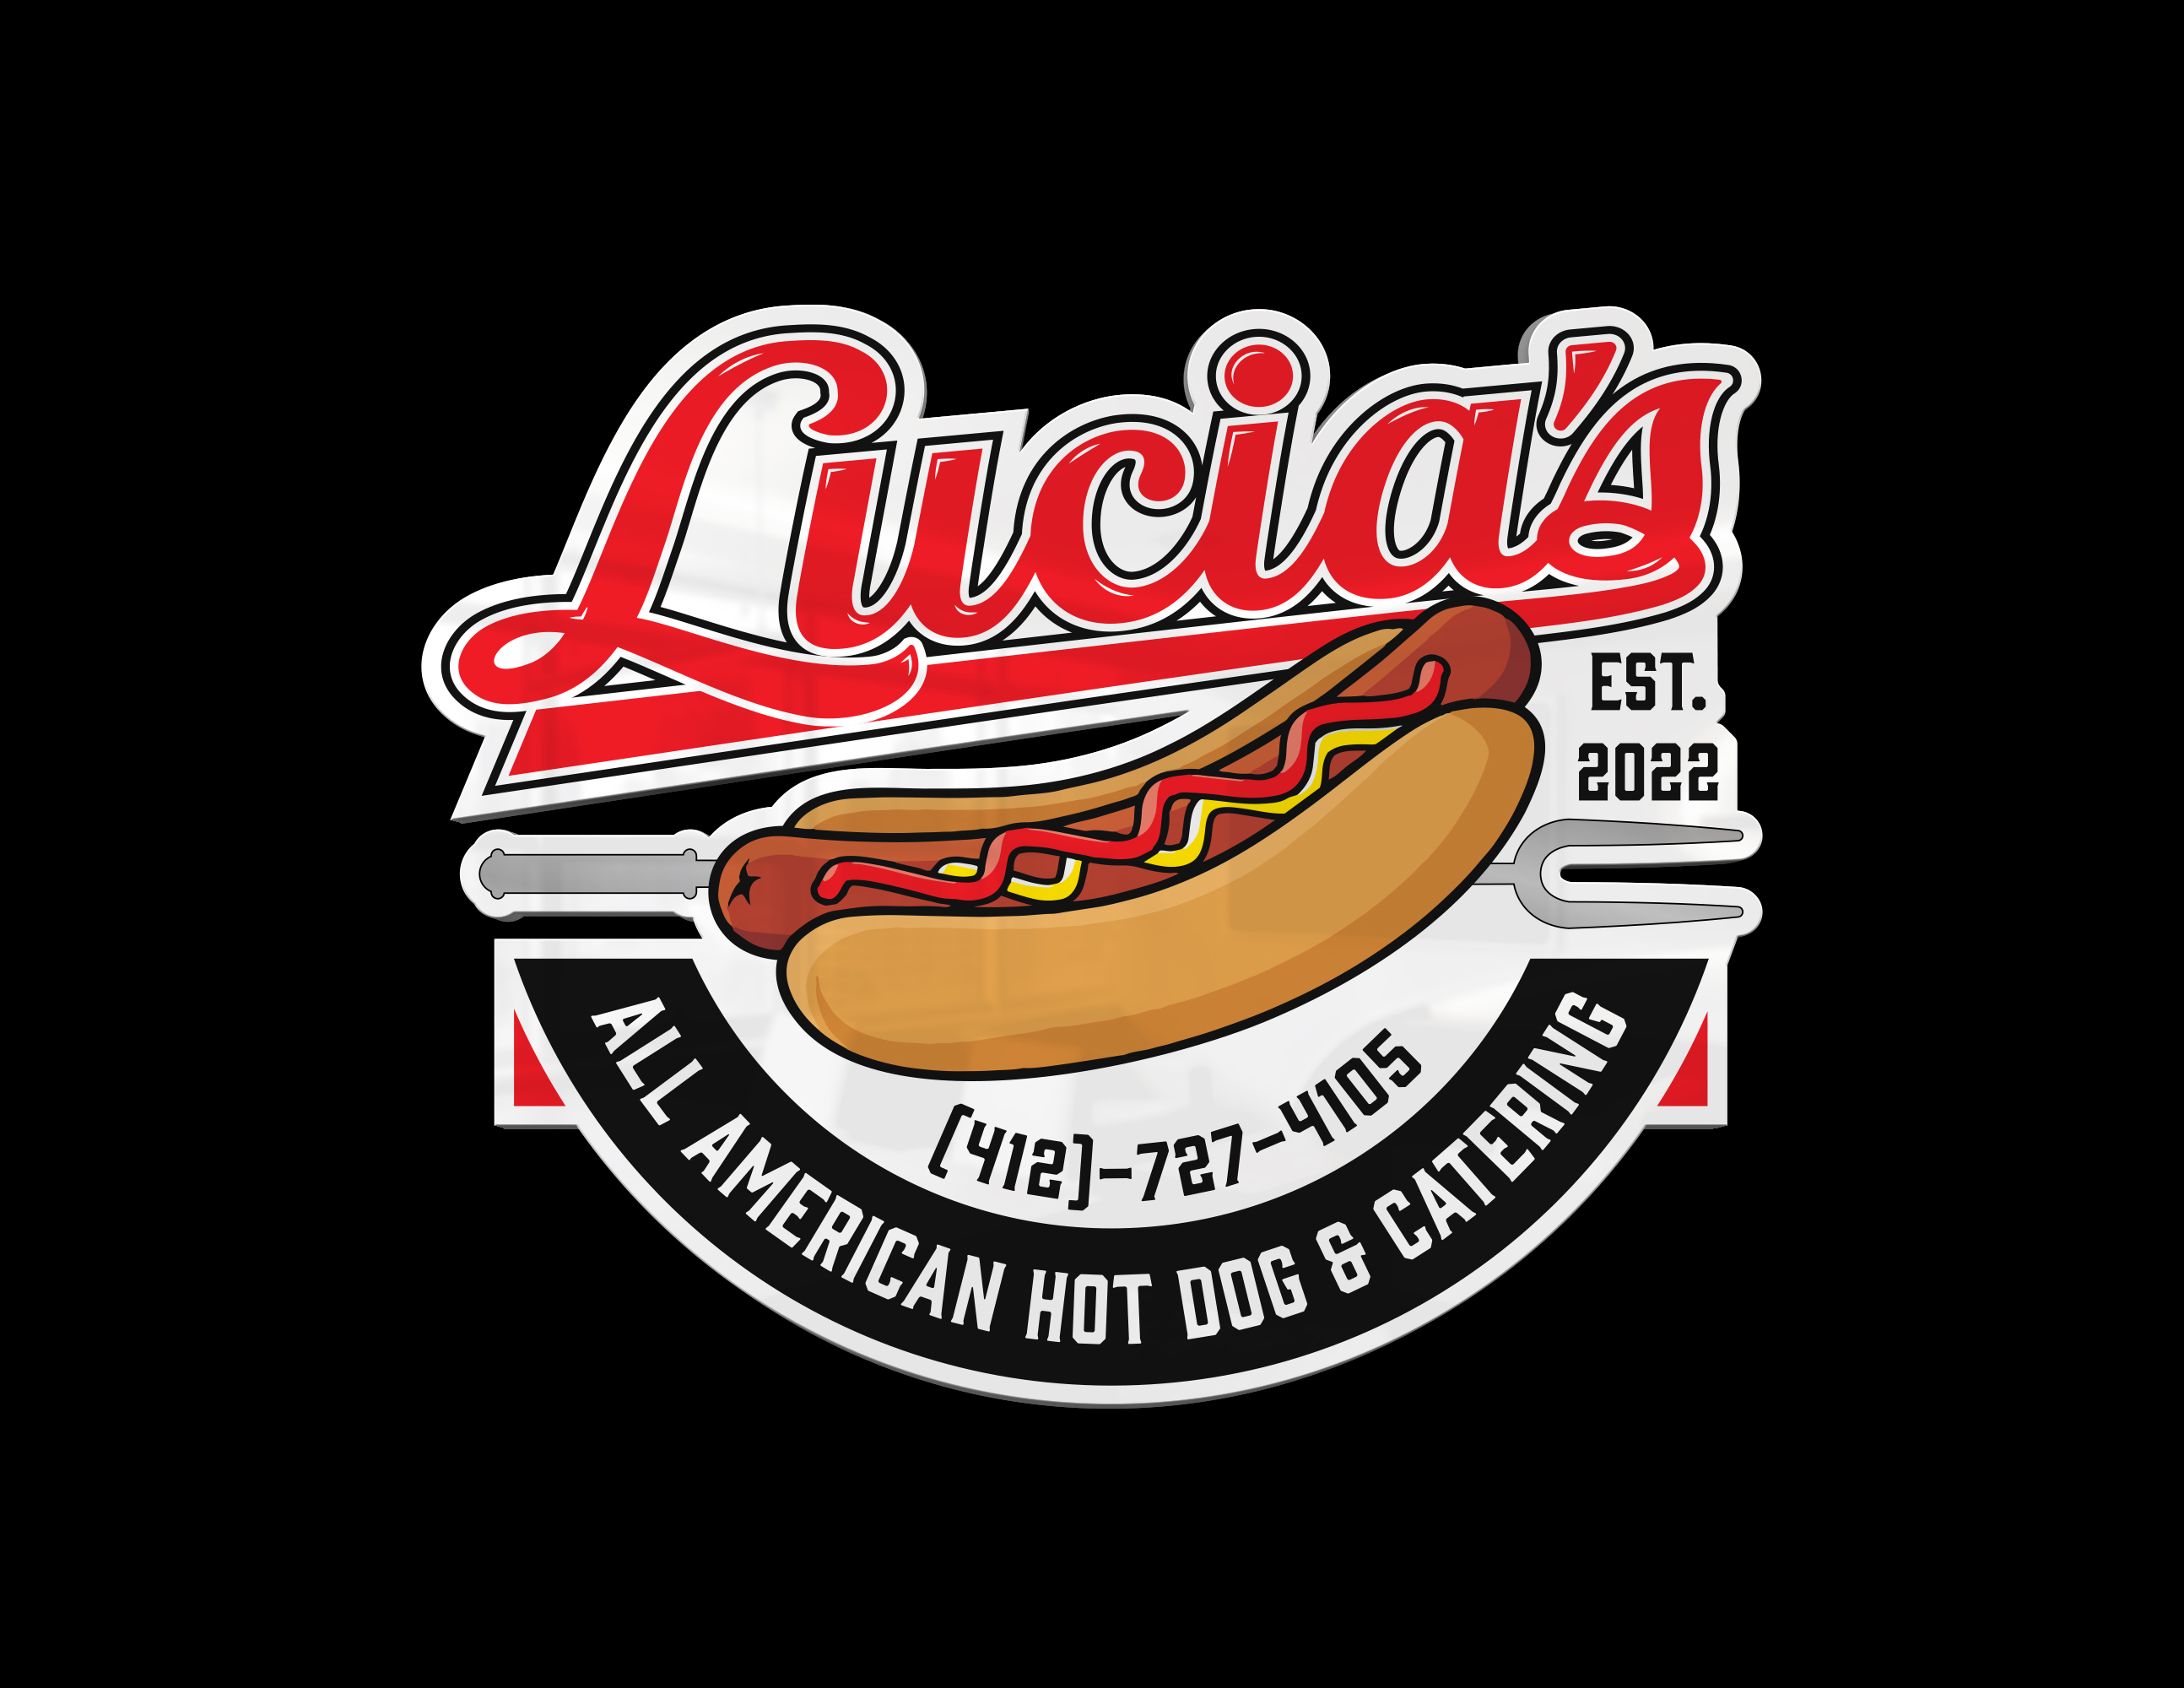 Lucia's All American Hot Dog & Catering food truck profile image